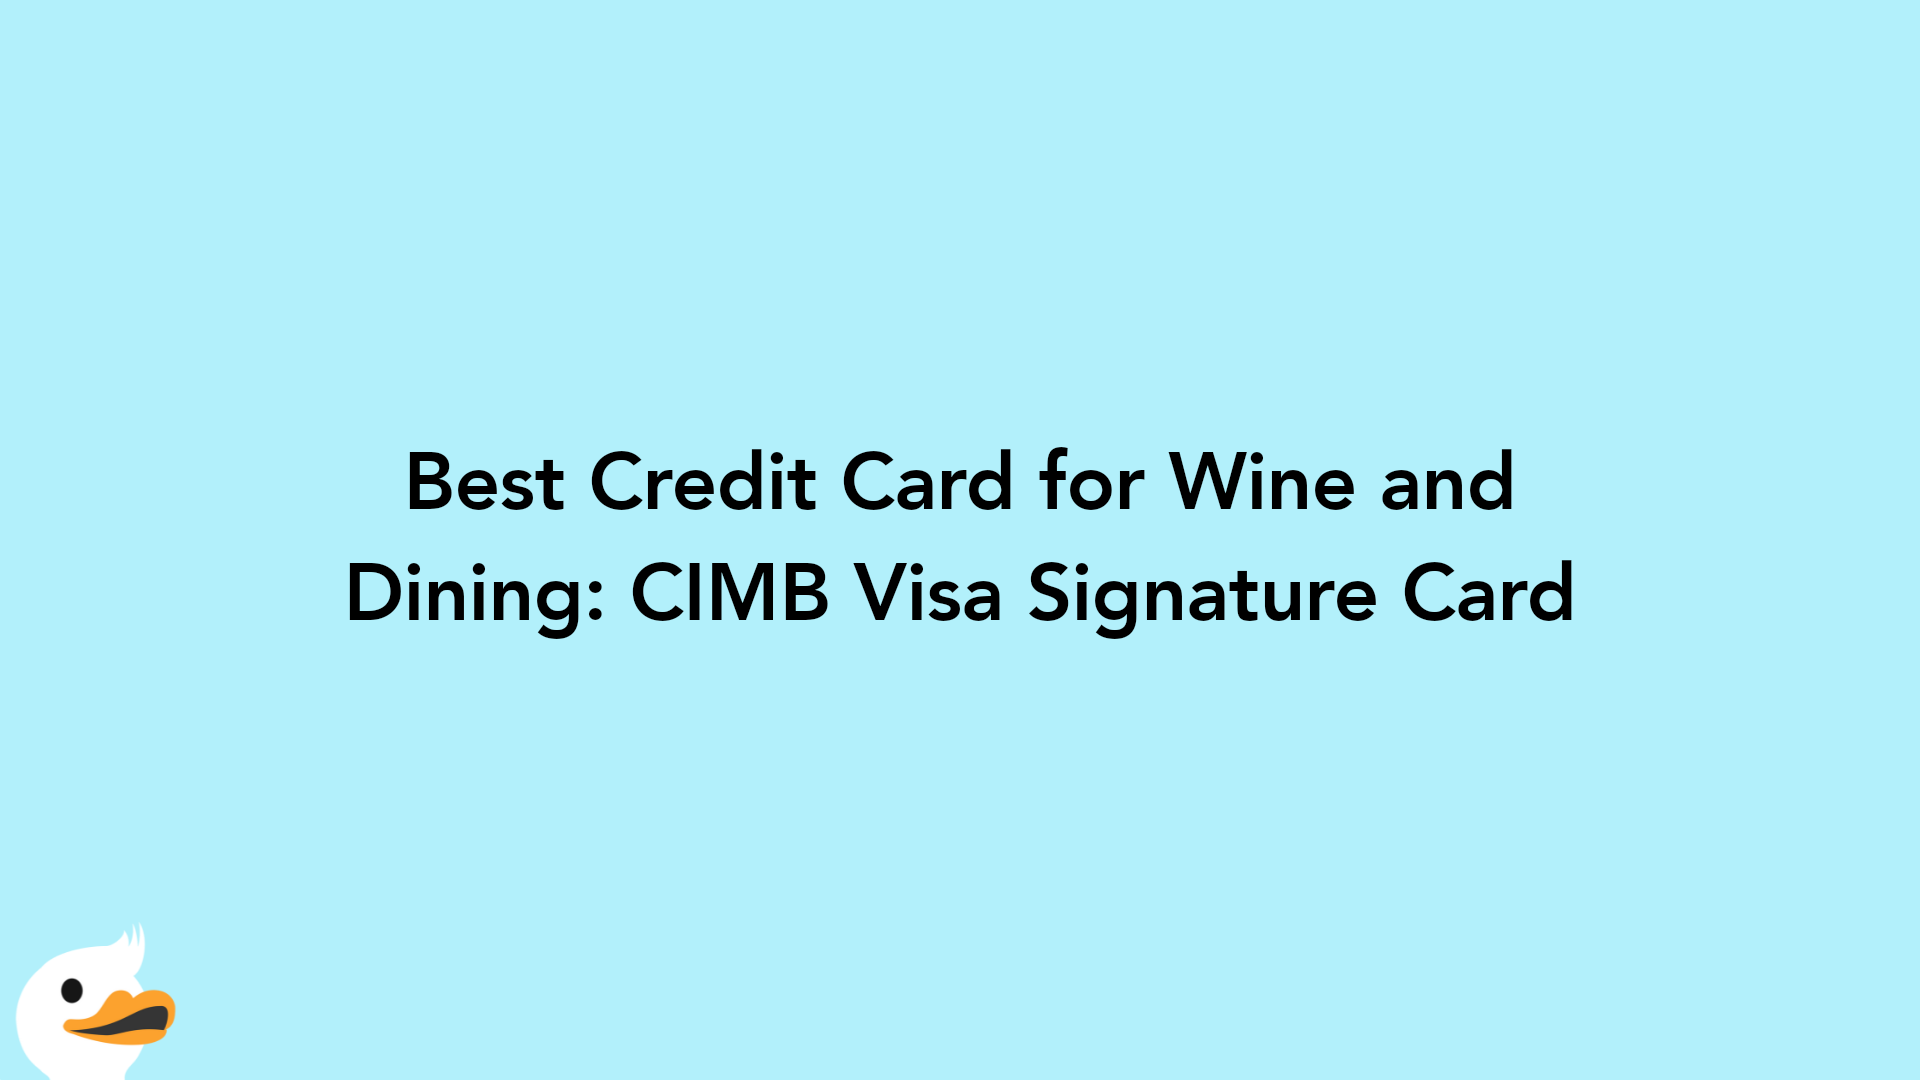 Best Credit Card for Wine and Dining: CIMB Visa Signature Card